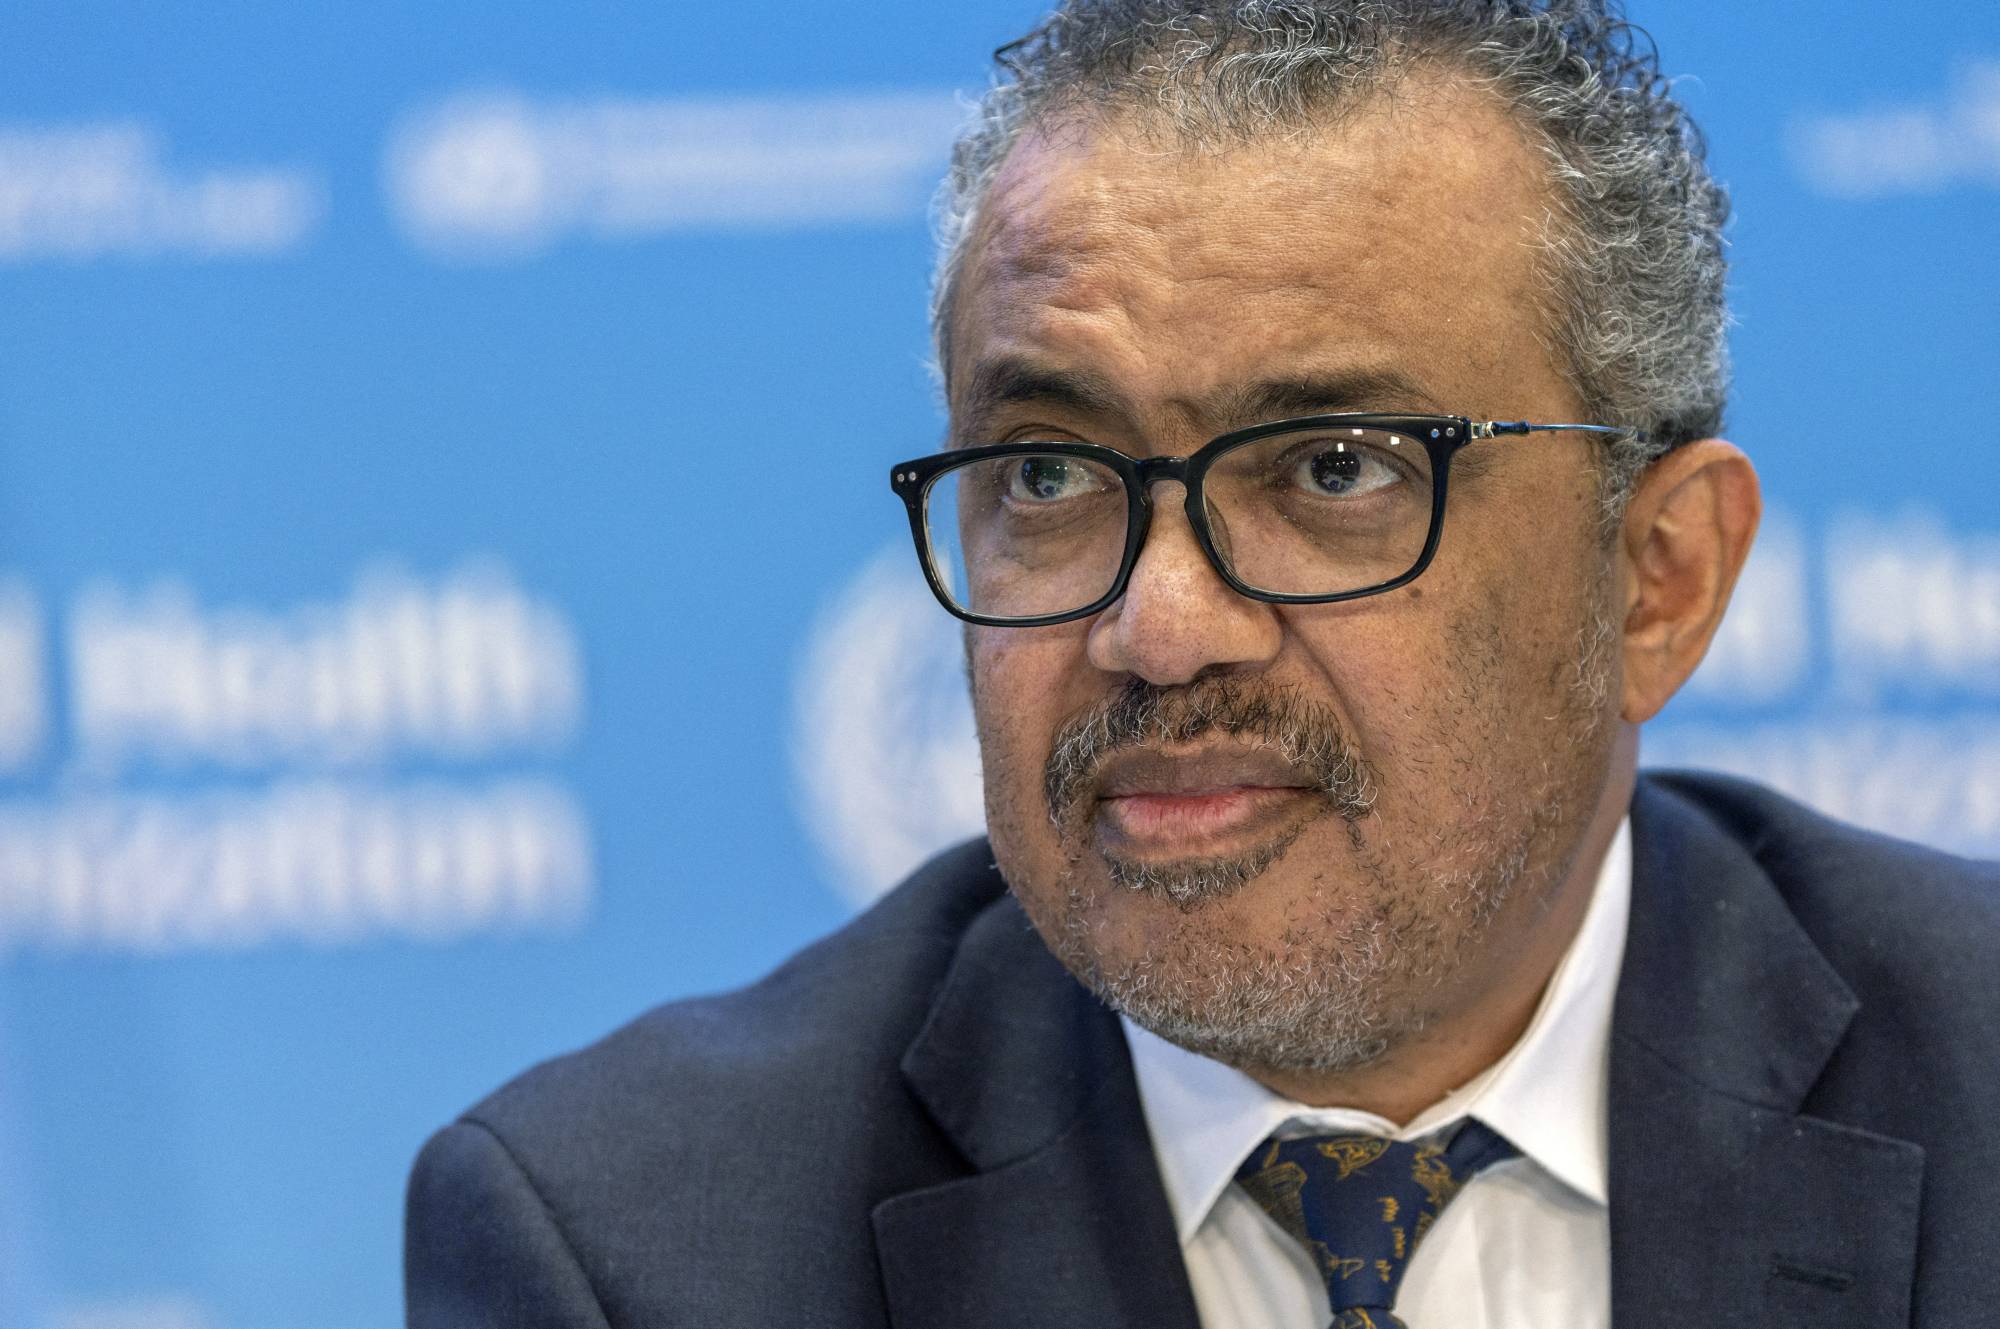 Director-General of the World Health Organisation Dr. Tedros Adhanom Ghebreyesus attends an briefing on global health issues, including the COVID-19 pandemic and the war in Ukraine, in Geneva on Dec. 14. | REUTERS